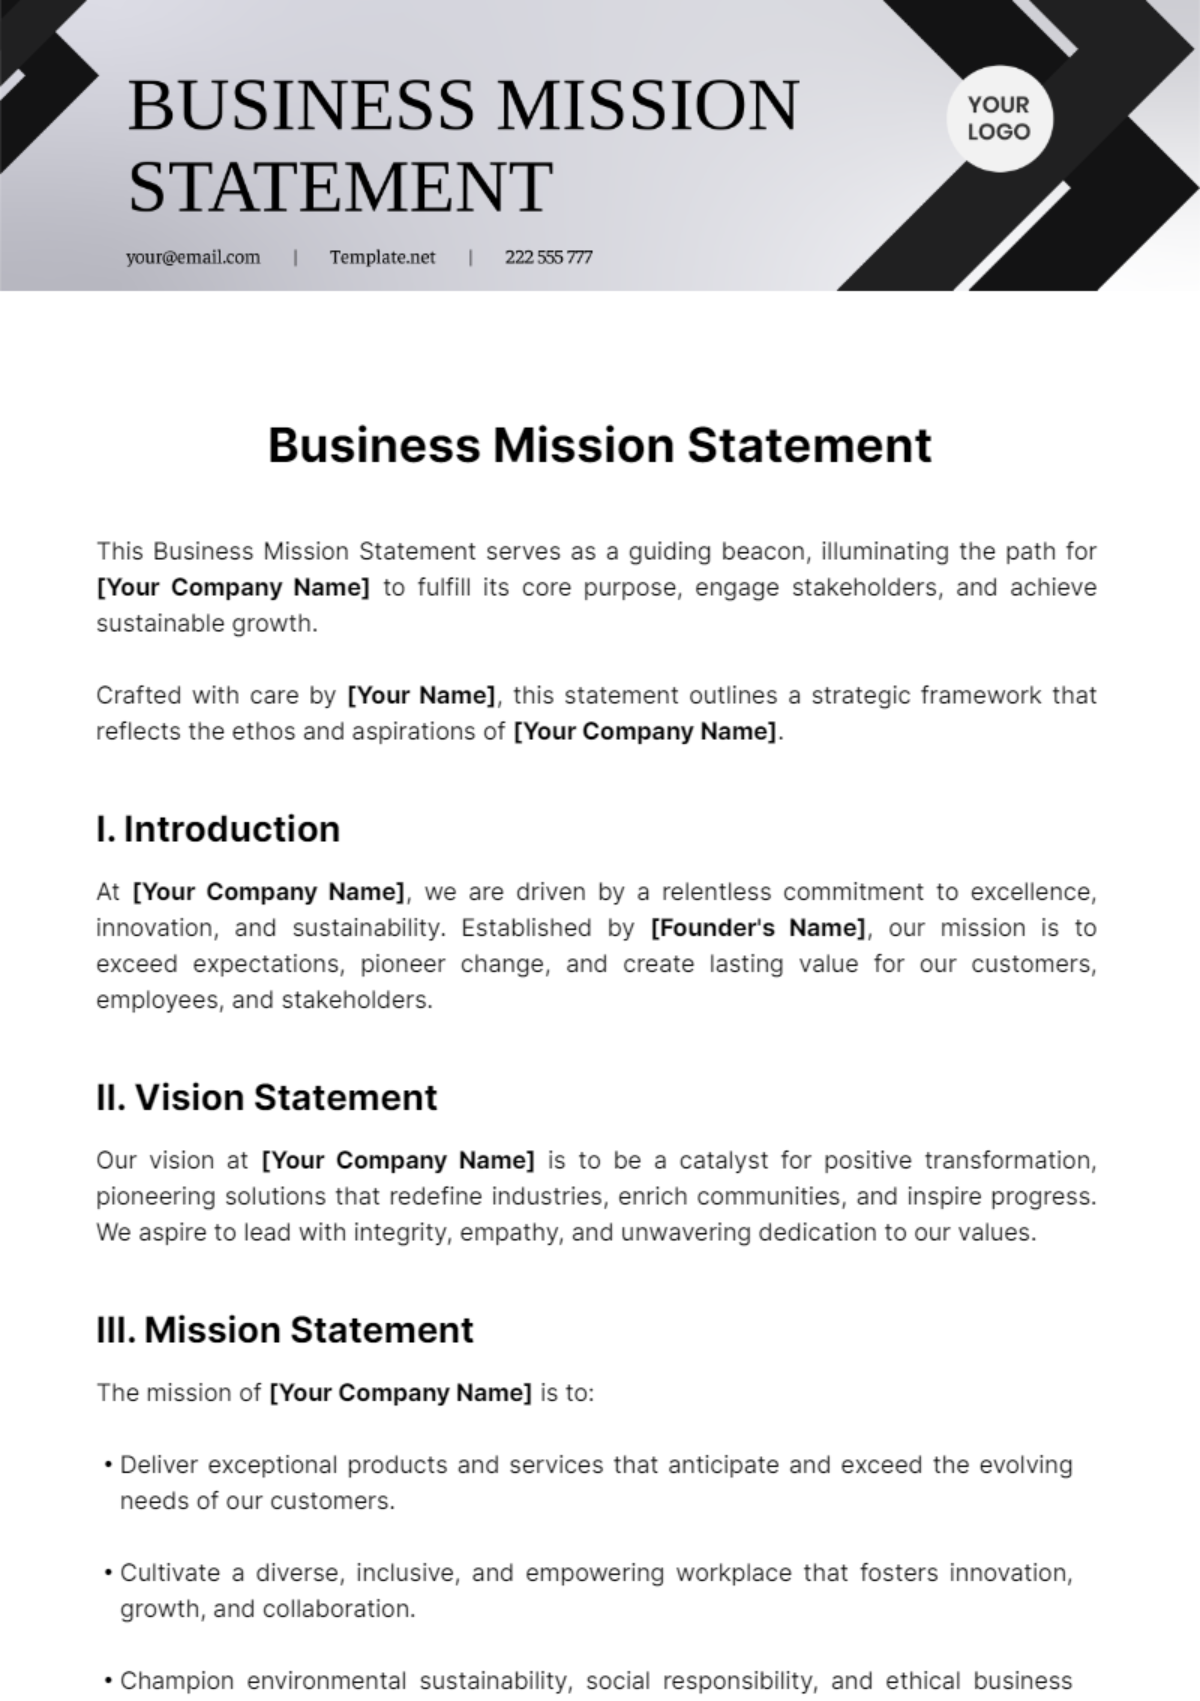 Business Mission Statement Template